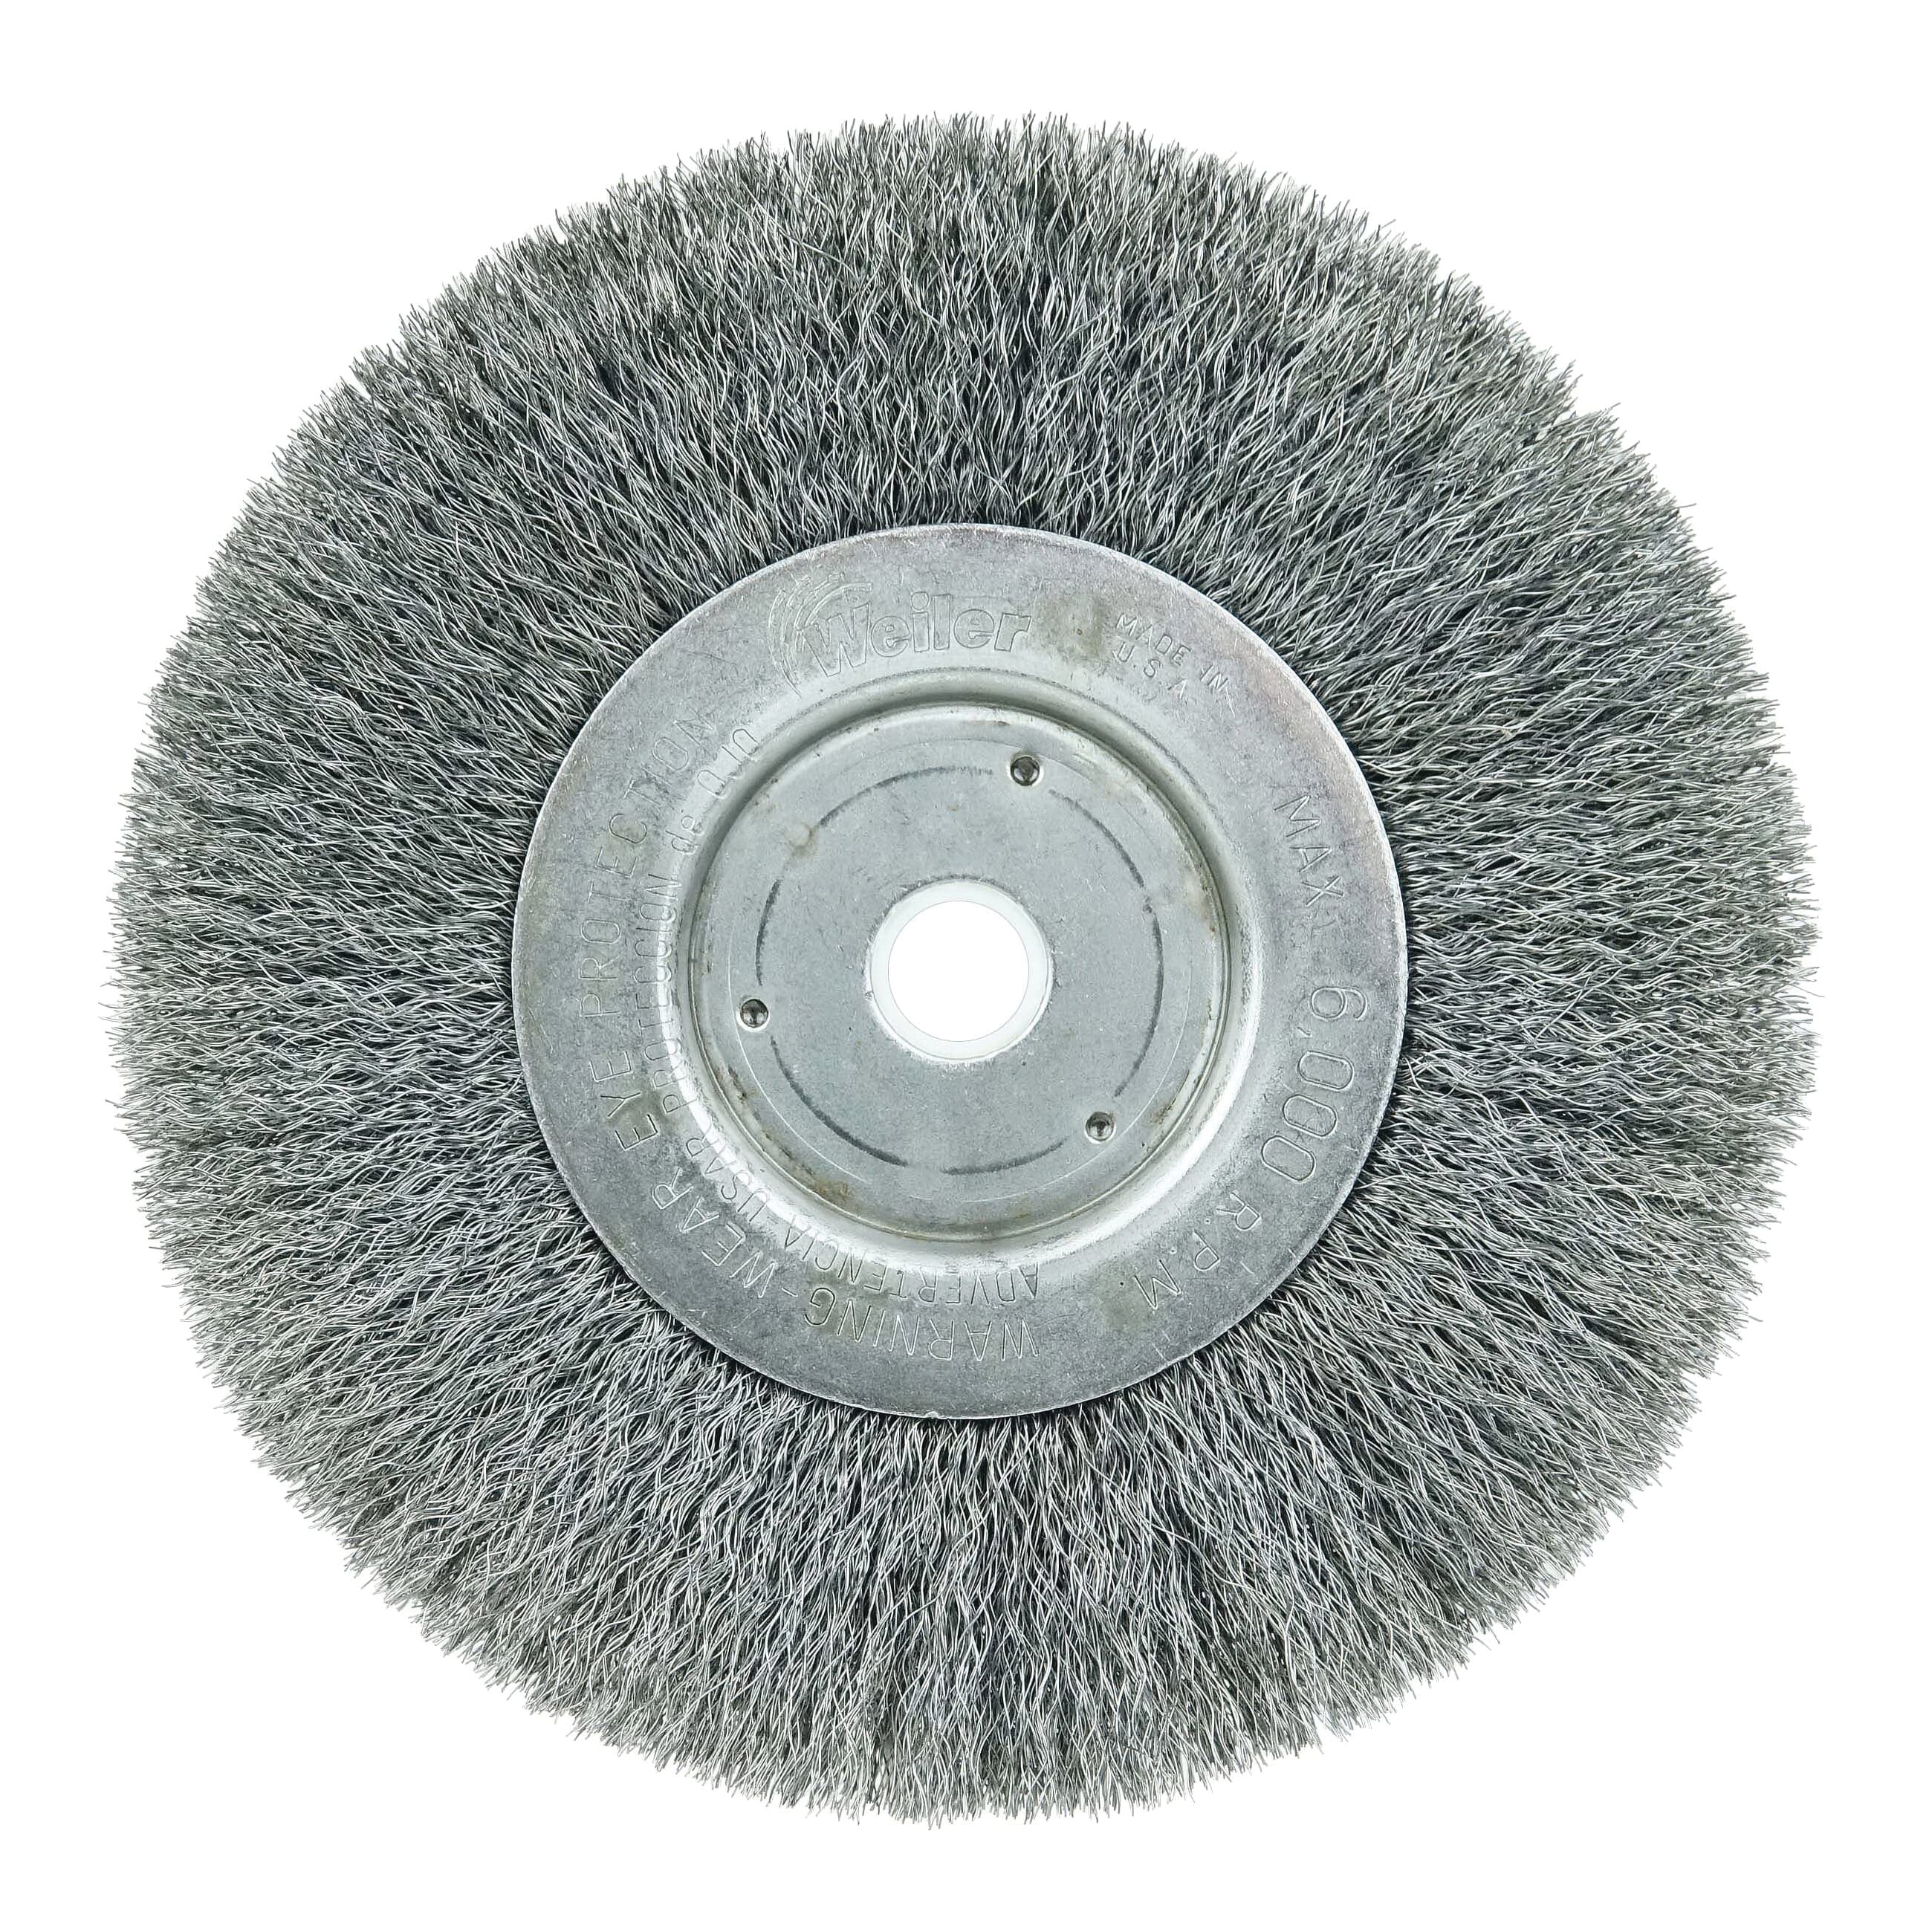 Weiler® 01045 Narrow Face Wheel Brush, 6 in Dia Brush, 3/4 in W Face, 0.008 in Dia Crimped Filament/Wire, 1/2 to 5/8 in Arbor Hole